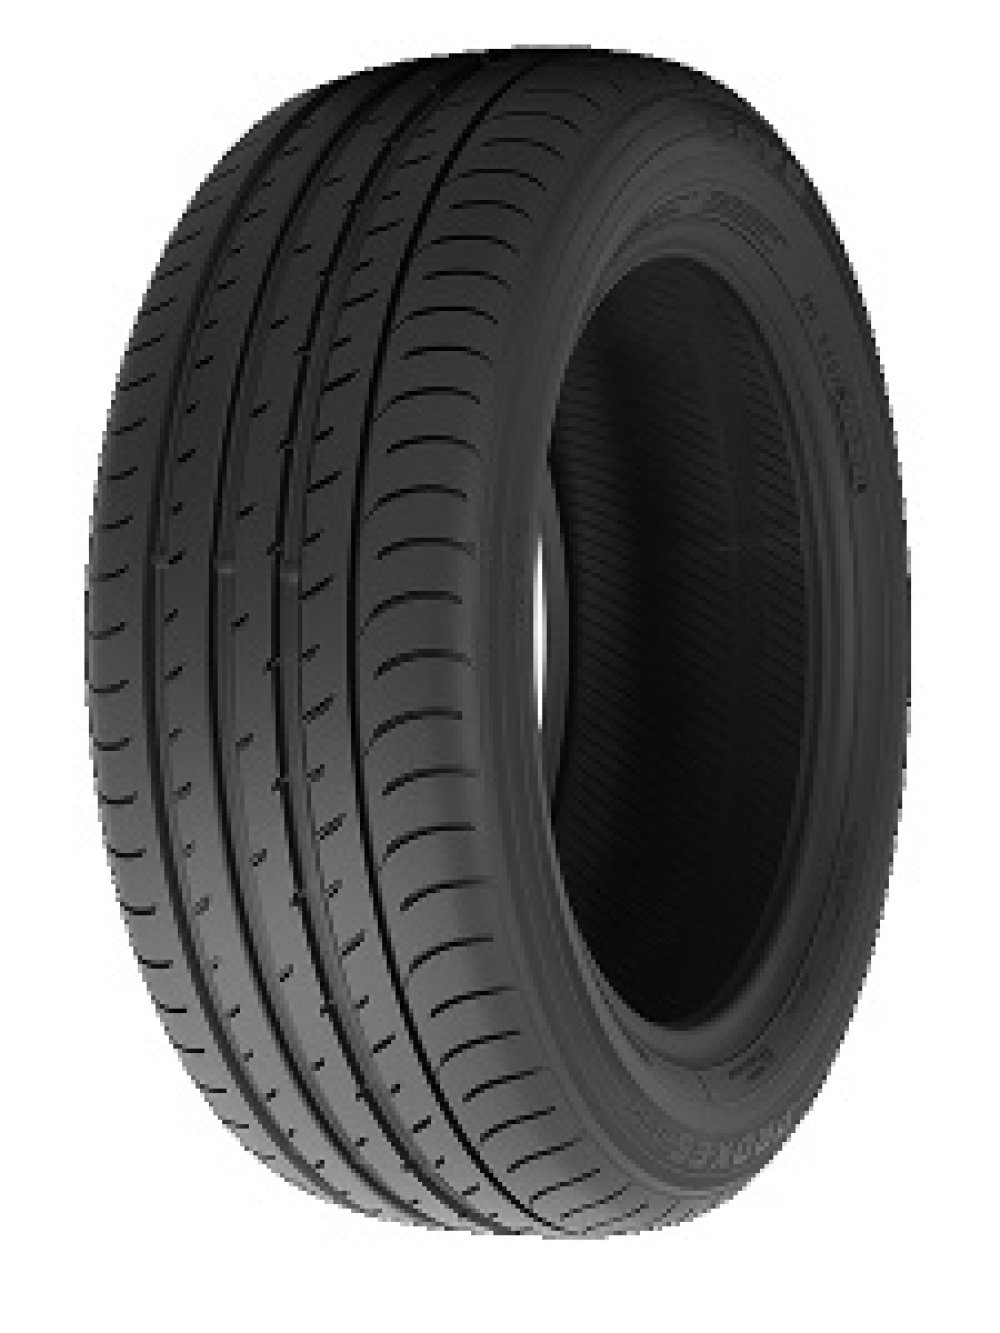 Toyo Proxes R54 ( 225/55 R17 97V Left Hand Drive )